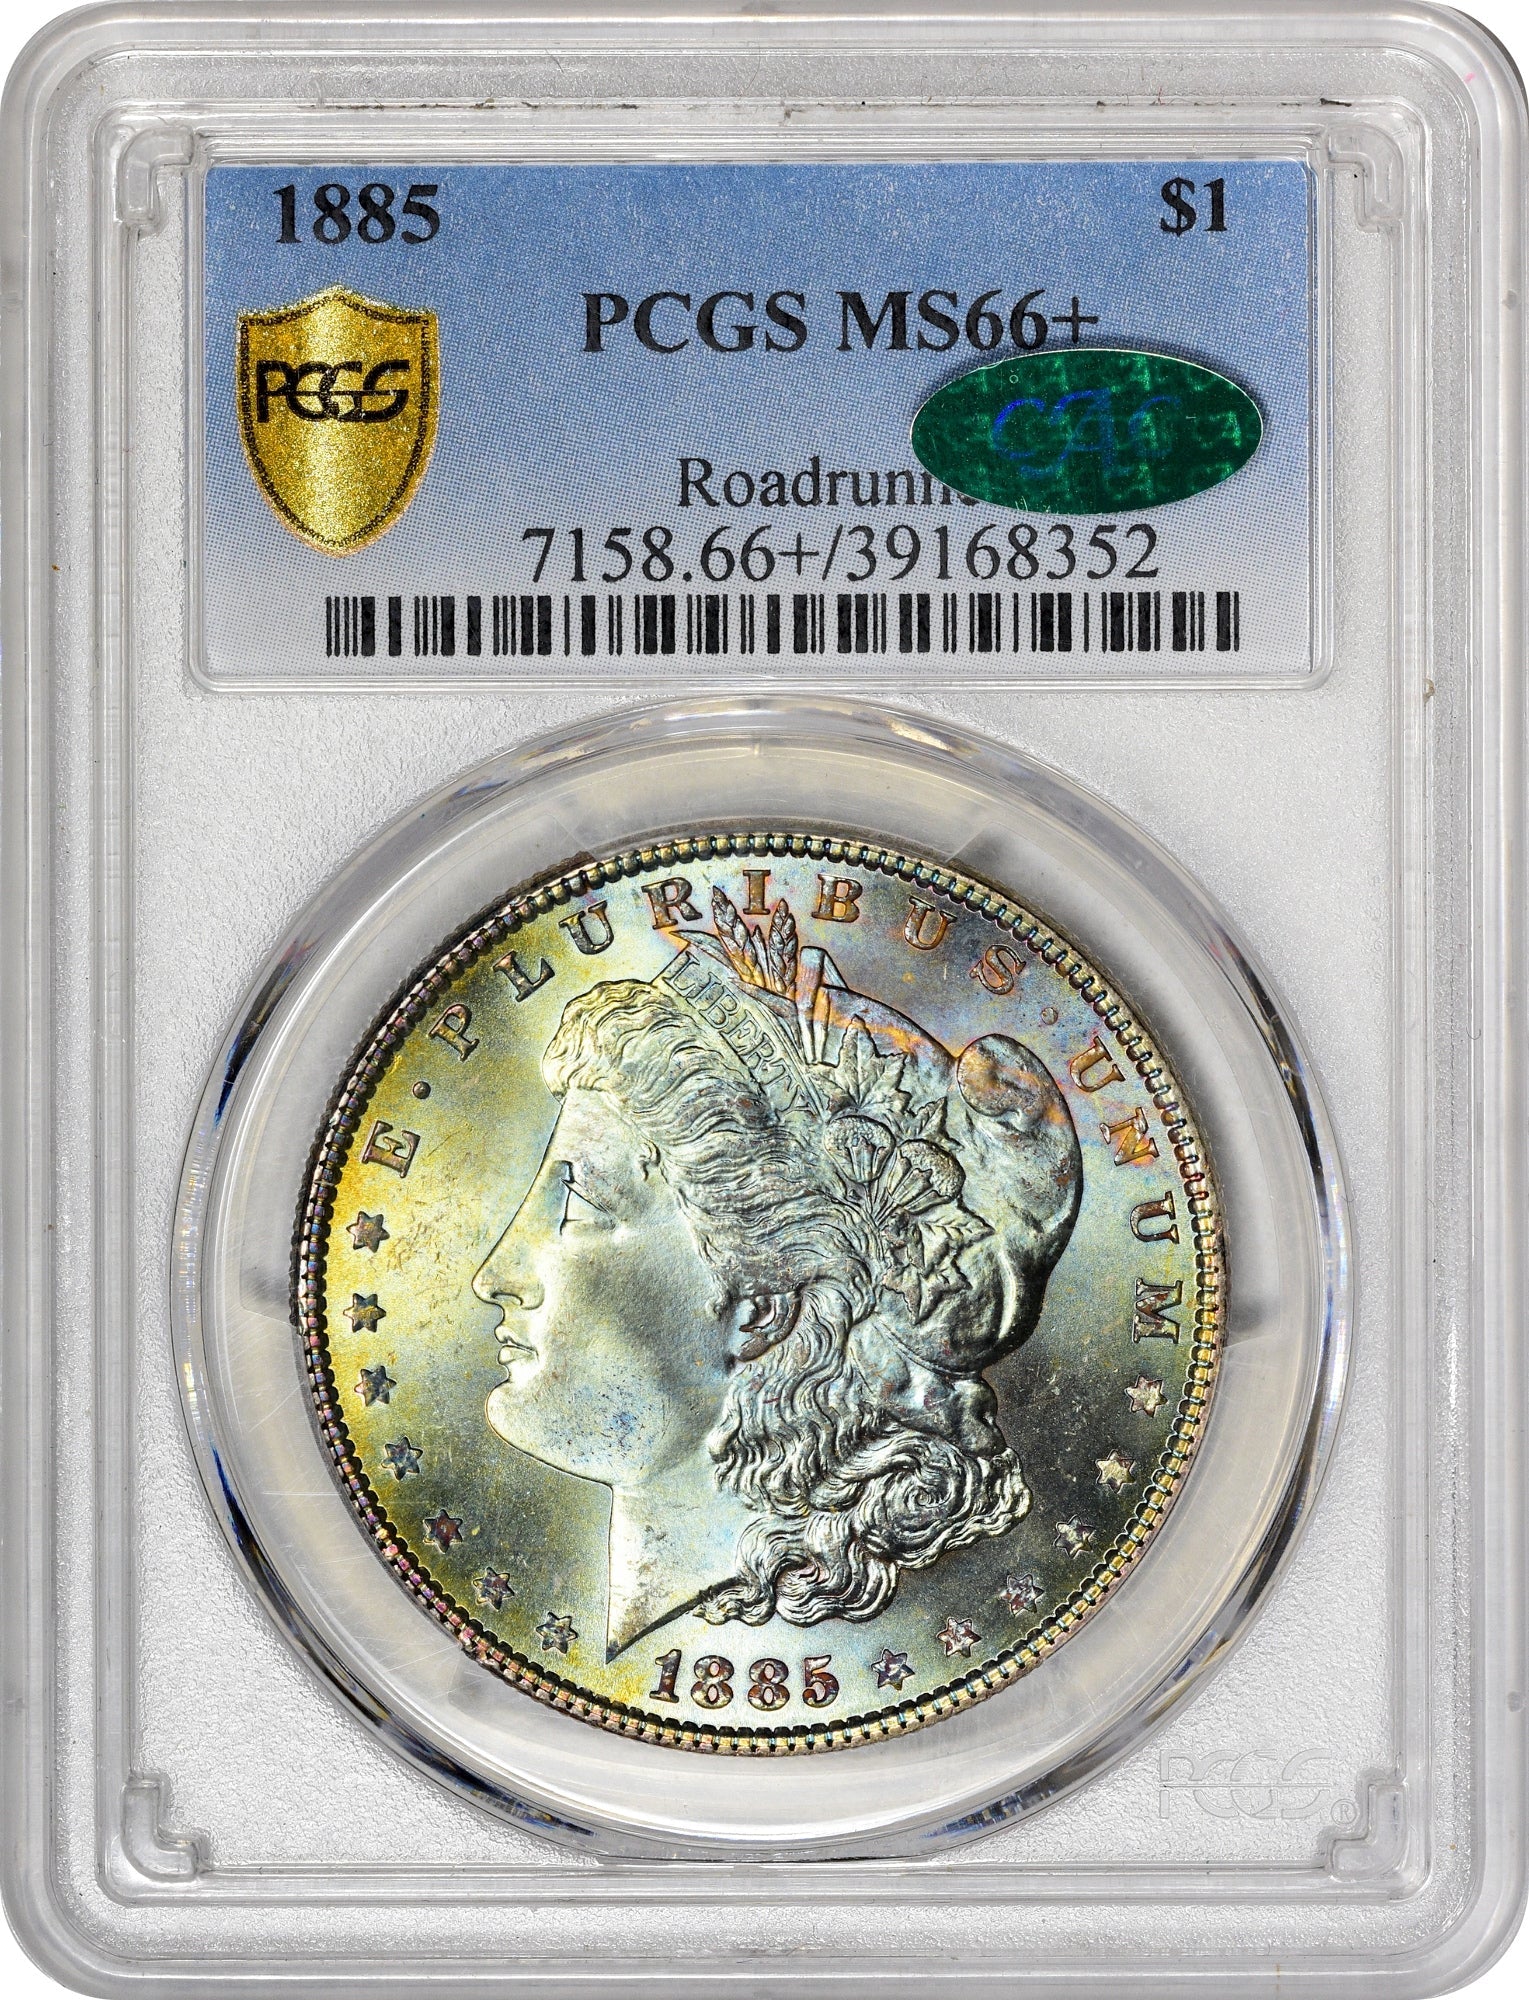 1885 $1 MS66+ PCGS CAC EX ROADRUNNER - Paradime Coins | PCGS NGC CACG CAC Rare US Numismatic Coins For Sale